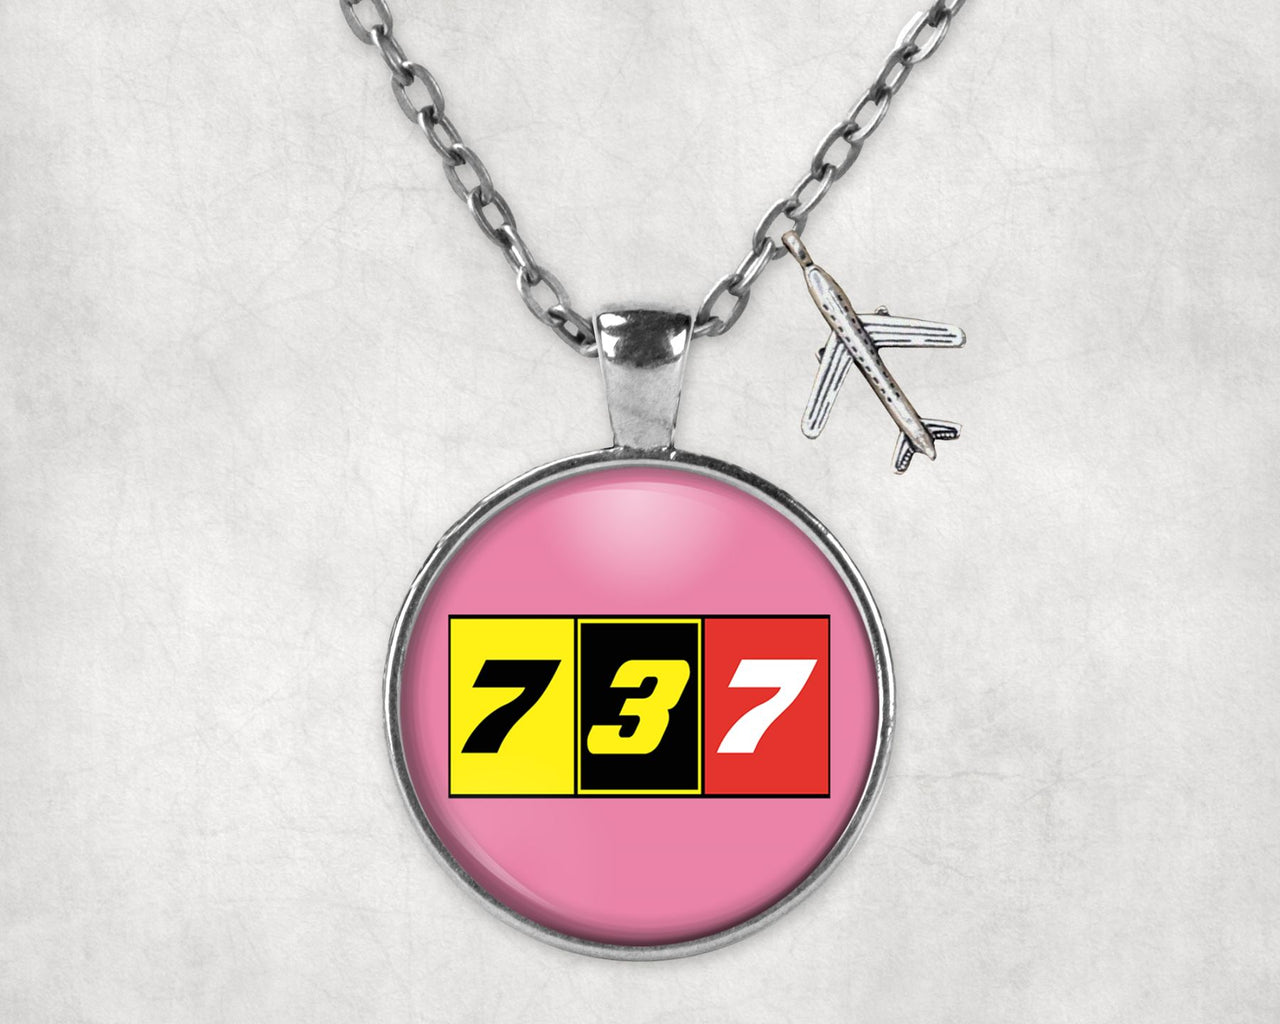 Flat Colourful 737 Designed Necklaces